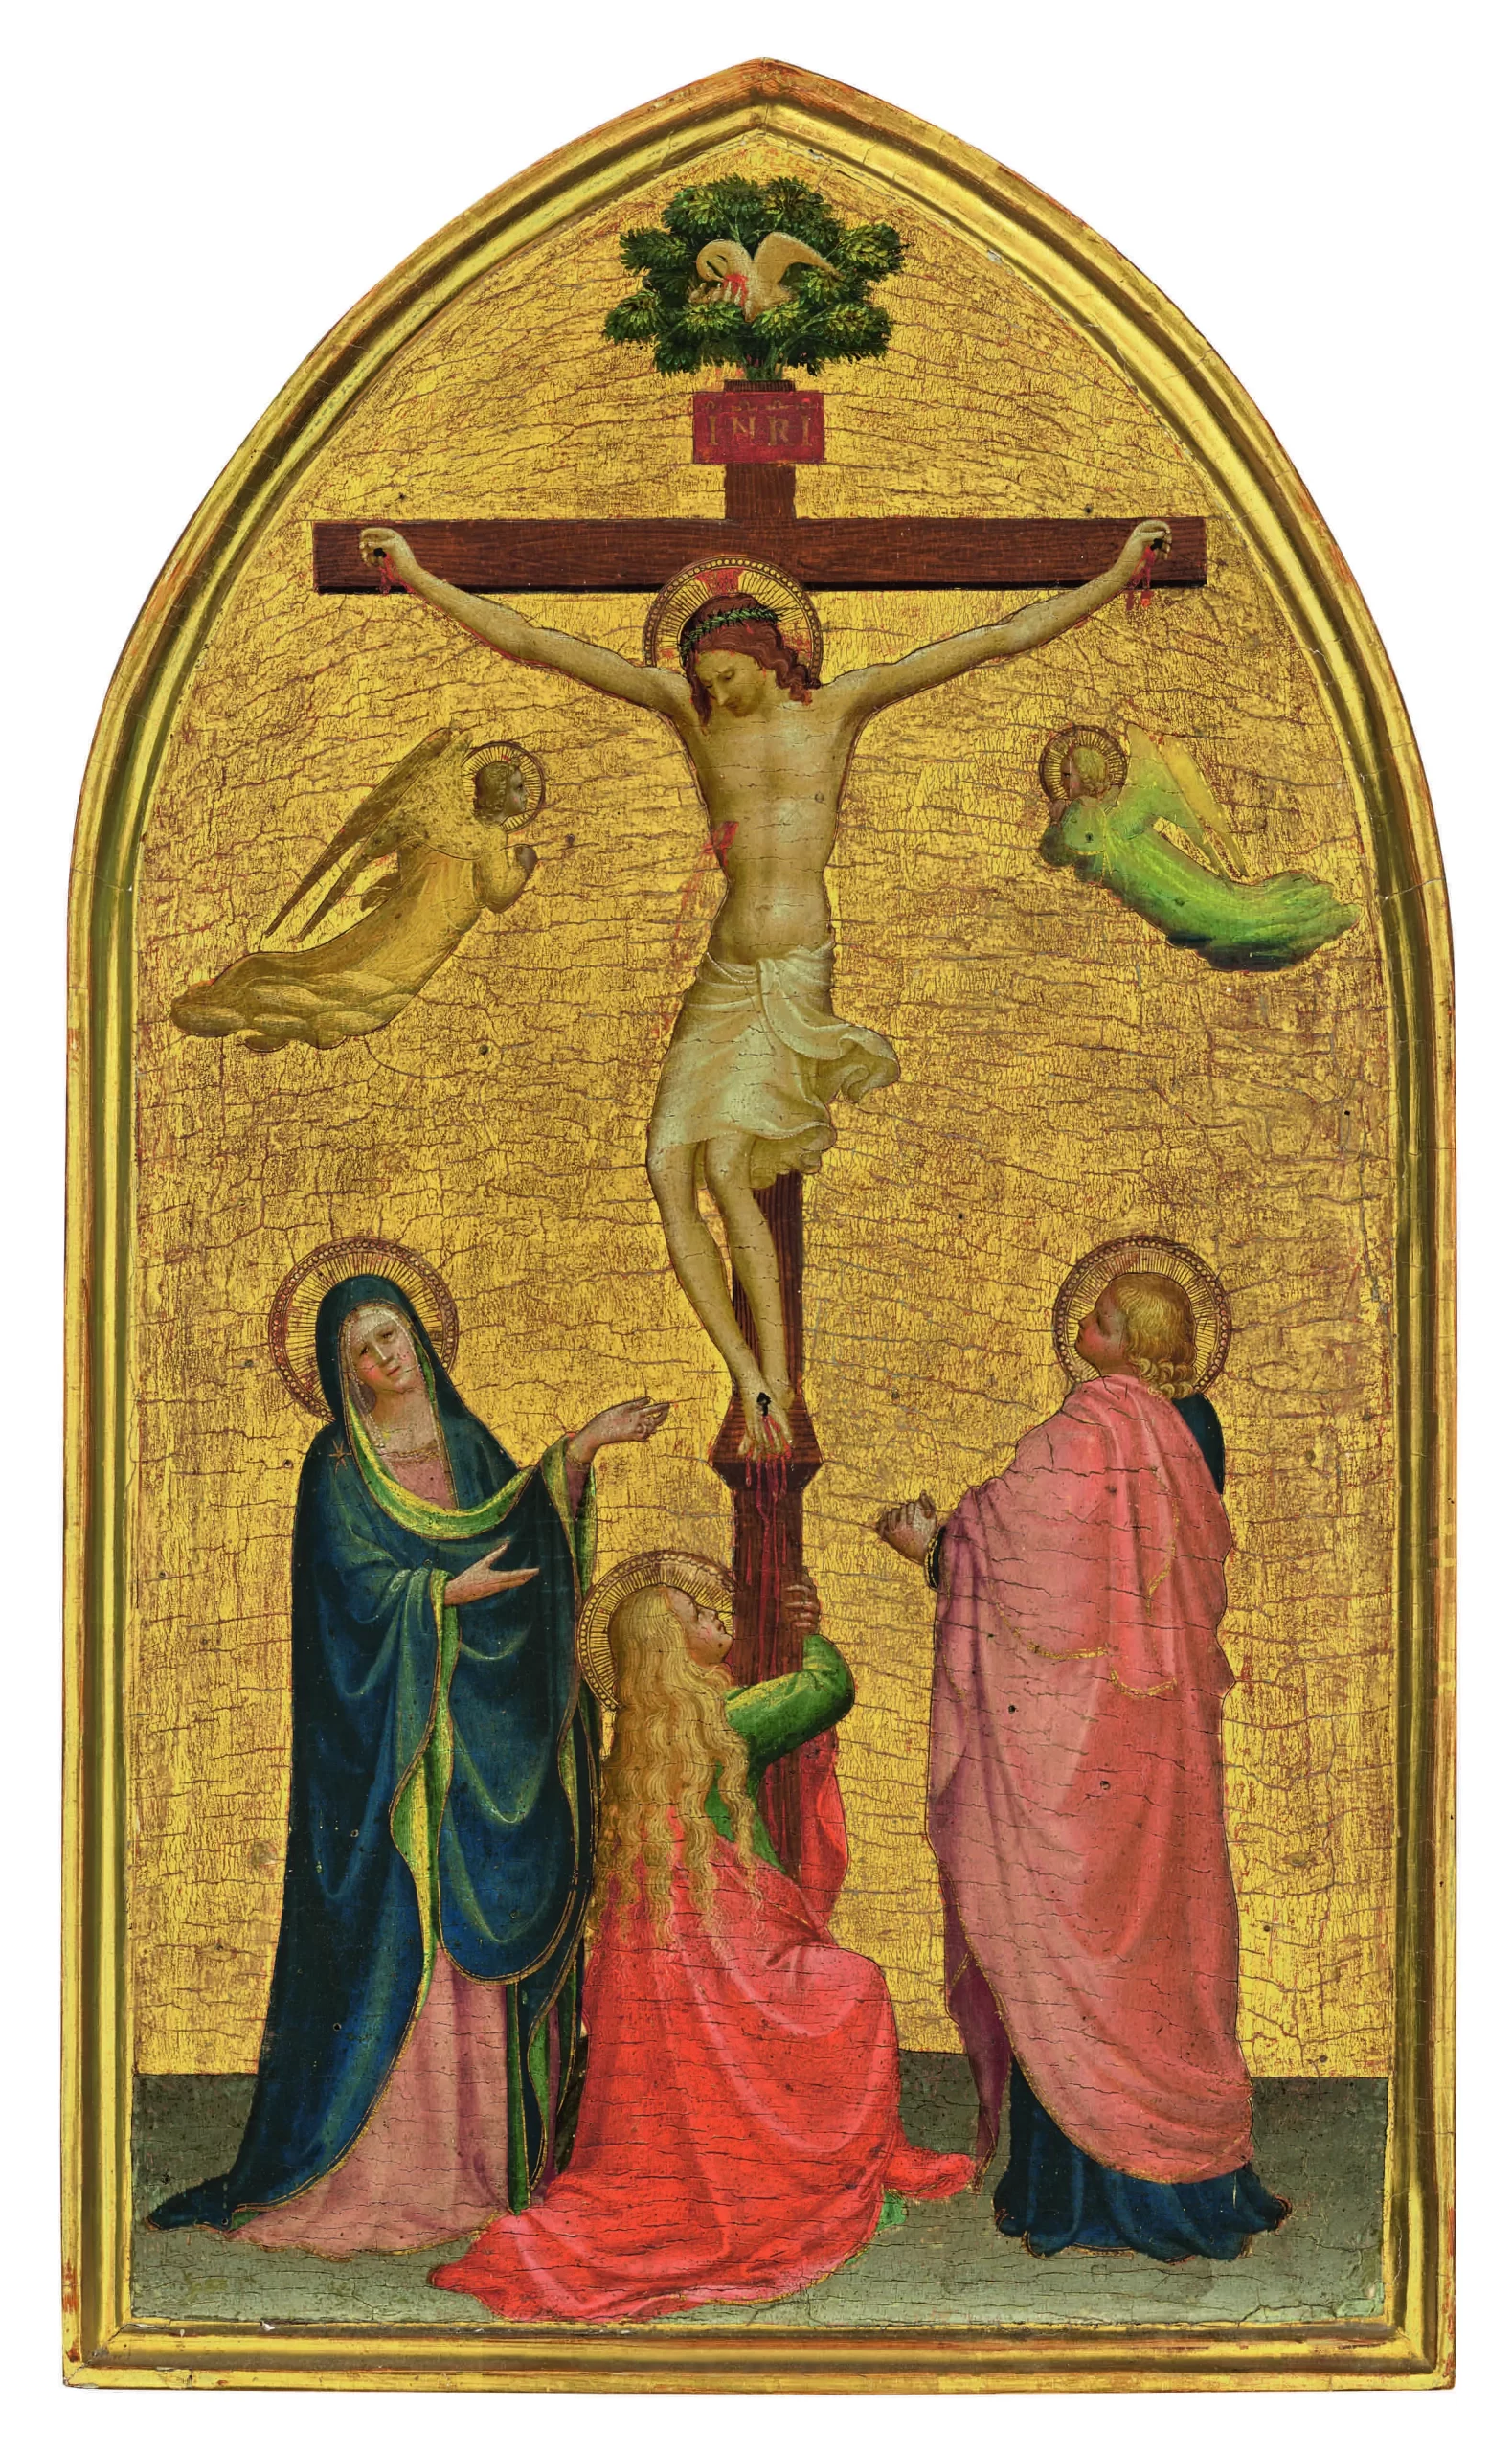 Fra Angelico's painting of the Crucifixion sold at Christie's on July 6, 2023, for about $ 6.4 million. Photo courtesy of Christie’s Images Limited 2023